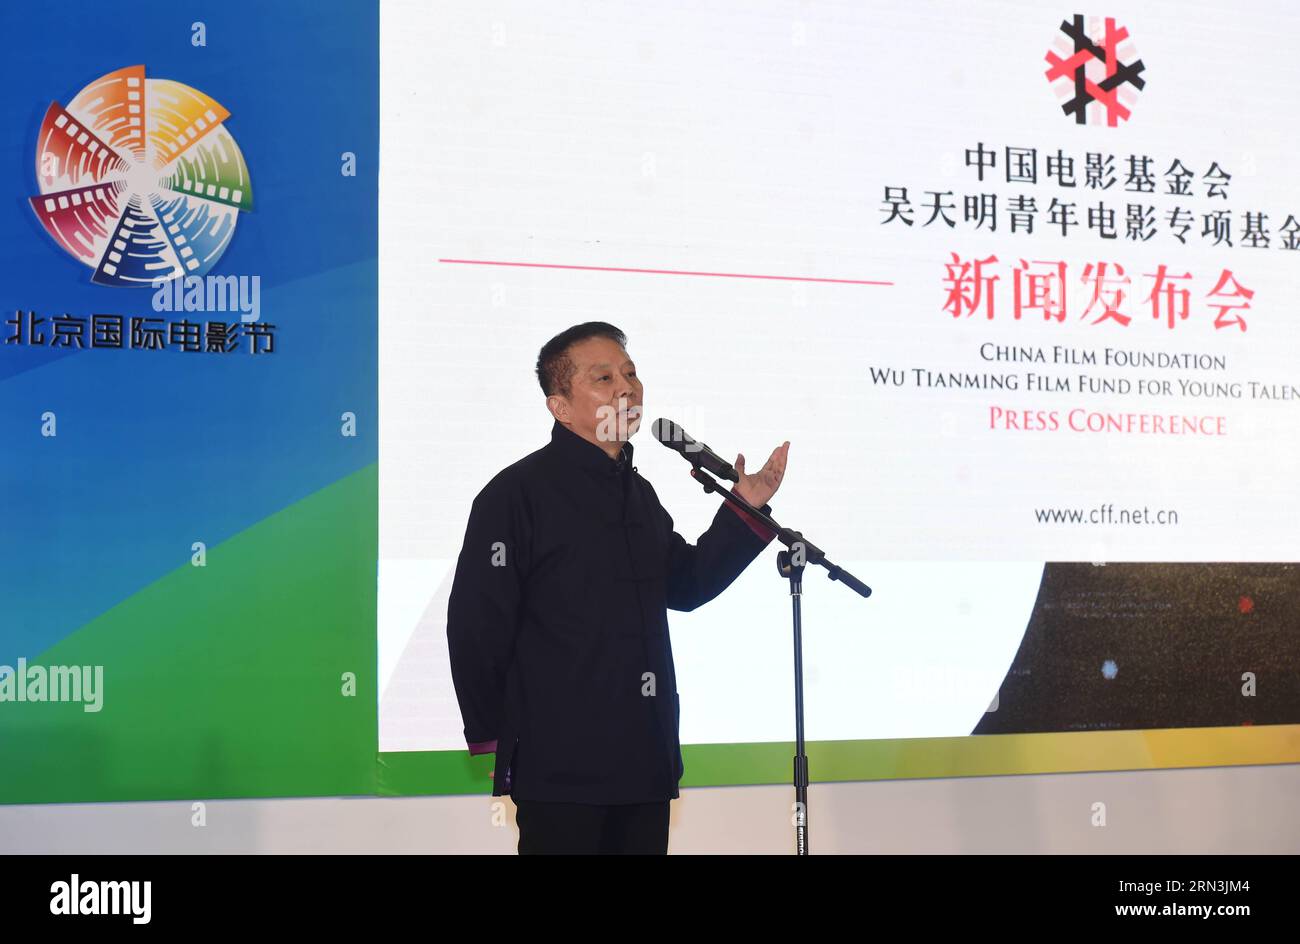 (150419) -- BEIJING, April 19, 2015 -- Director Huang Jianxin addresses a press conference of China Film Foundation Wu Tianming Film Fund for Young Talents during the fifth Beijing International Film Festival (BJIFF) in Beijing, capital of China, April 19, 2015. Wu Tianming was a leading figure of China s Fourth Generation film directors. His major works include Old Well and Life . ) (wjq) CHINA-BEIJING-FILM FESTIVAL-WU TIANMING FILM FUND-CONFERENCE (CN) LuoxXiaoguang PUBLICATIONxNOTxINxCHN   Beijing April 19 2015 Director Huang Jianxin addresses a Press Conference of China Film Foundation Wu Stock Photo